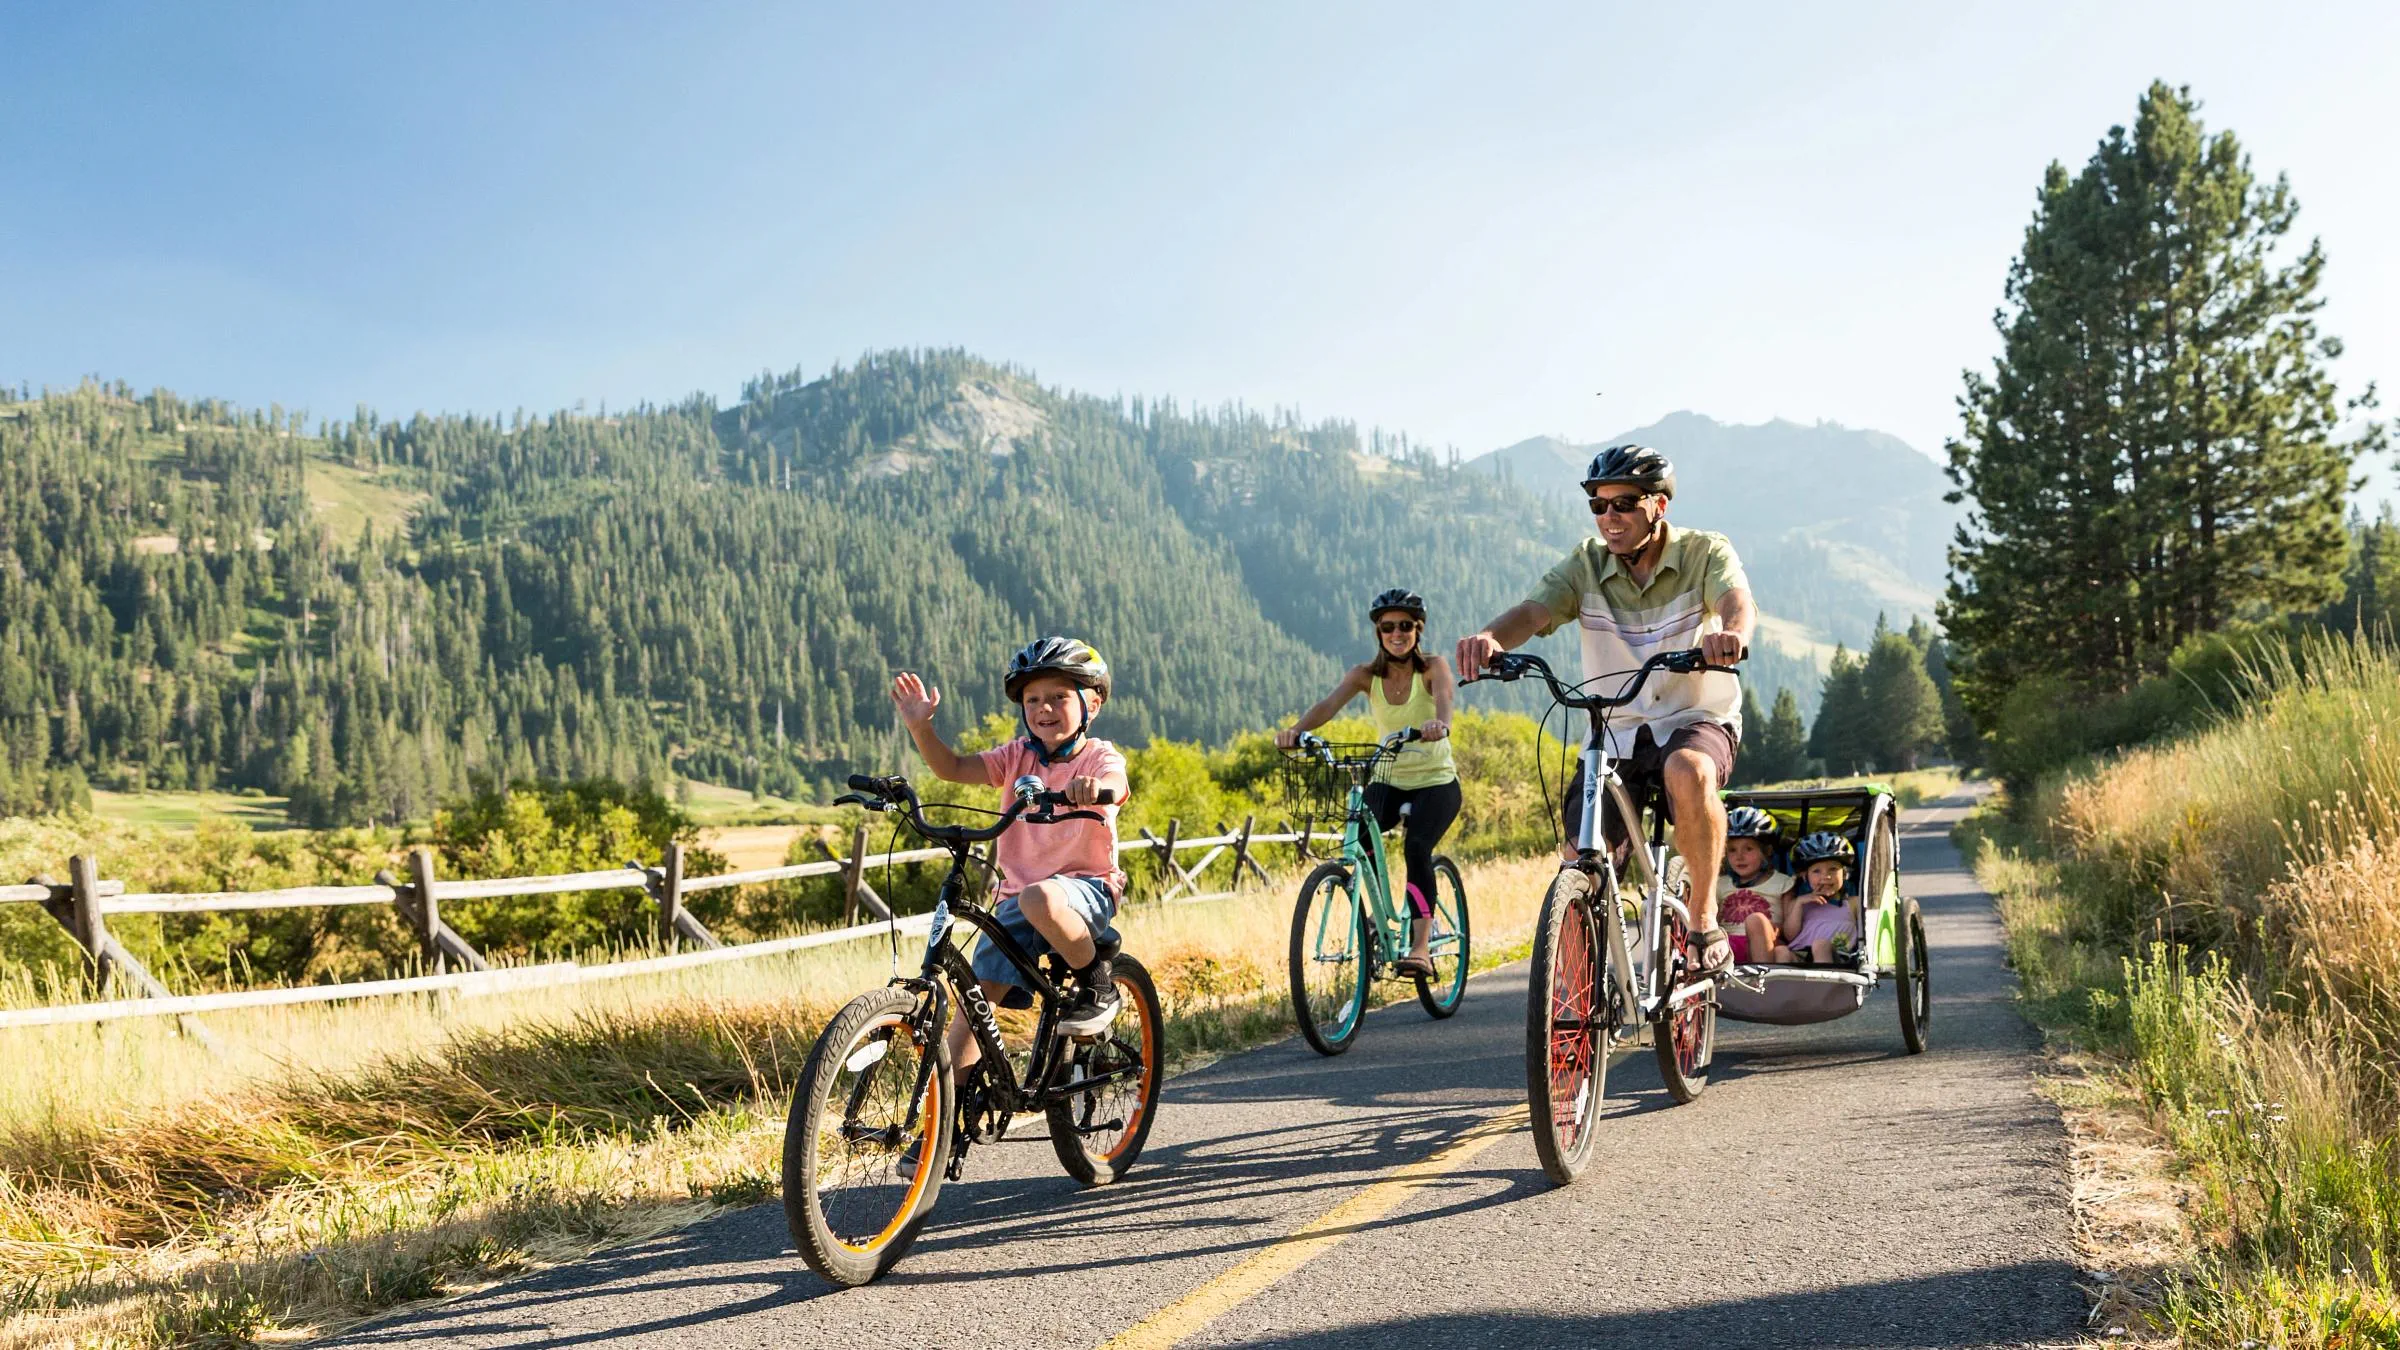 Family of Five Biking on the bike path at Squaw Valley Alpine Meadows